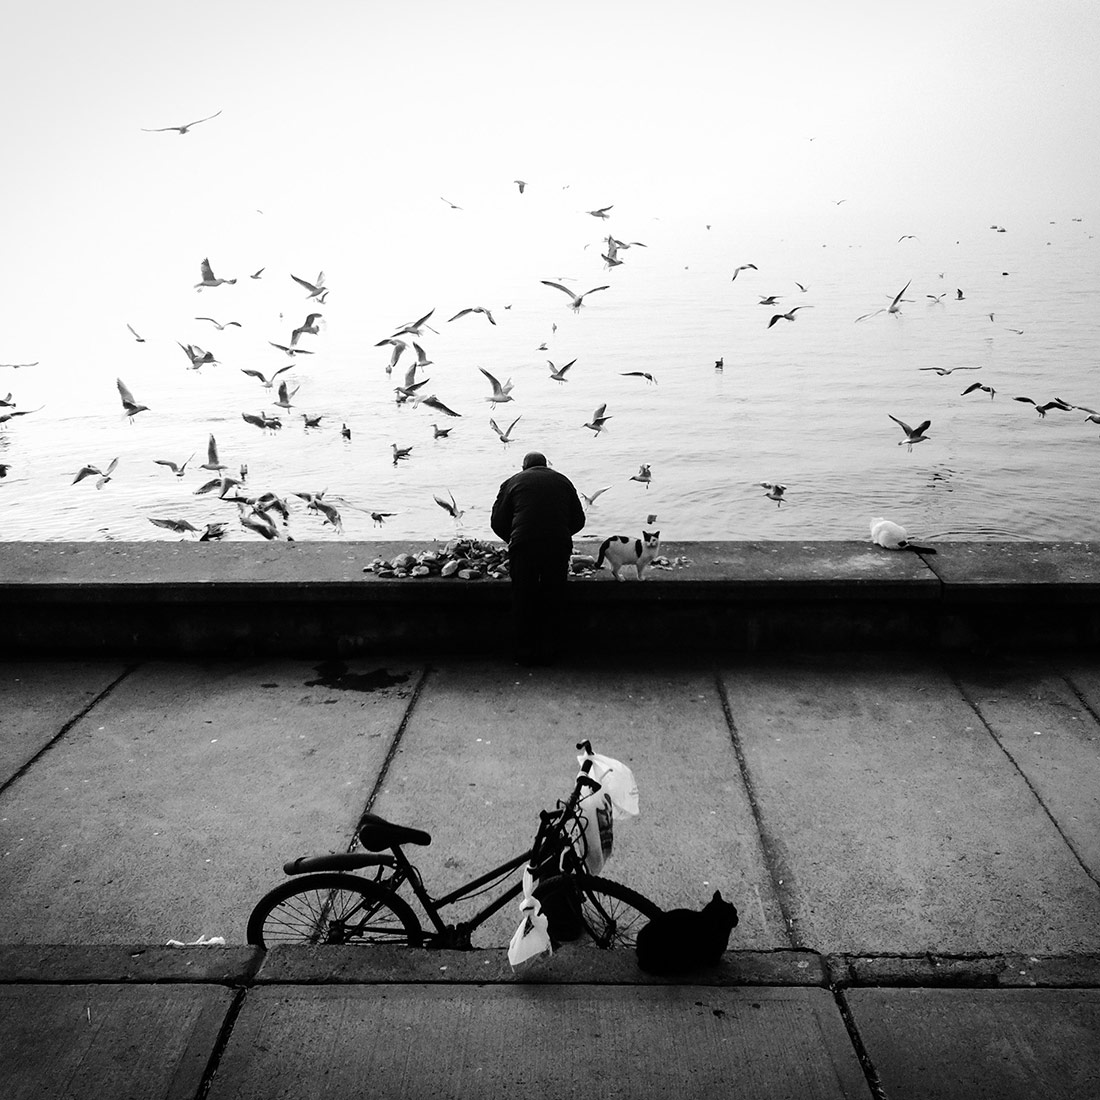 Stray with me, © Sevil Alkan, 1st Place - Black & White Street Series of the Year 2018, MonoVisions Photography Awards